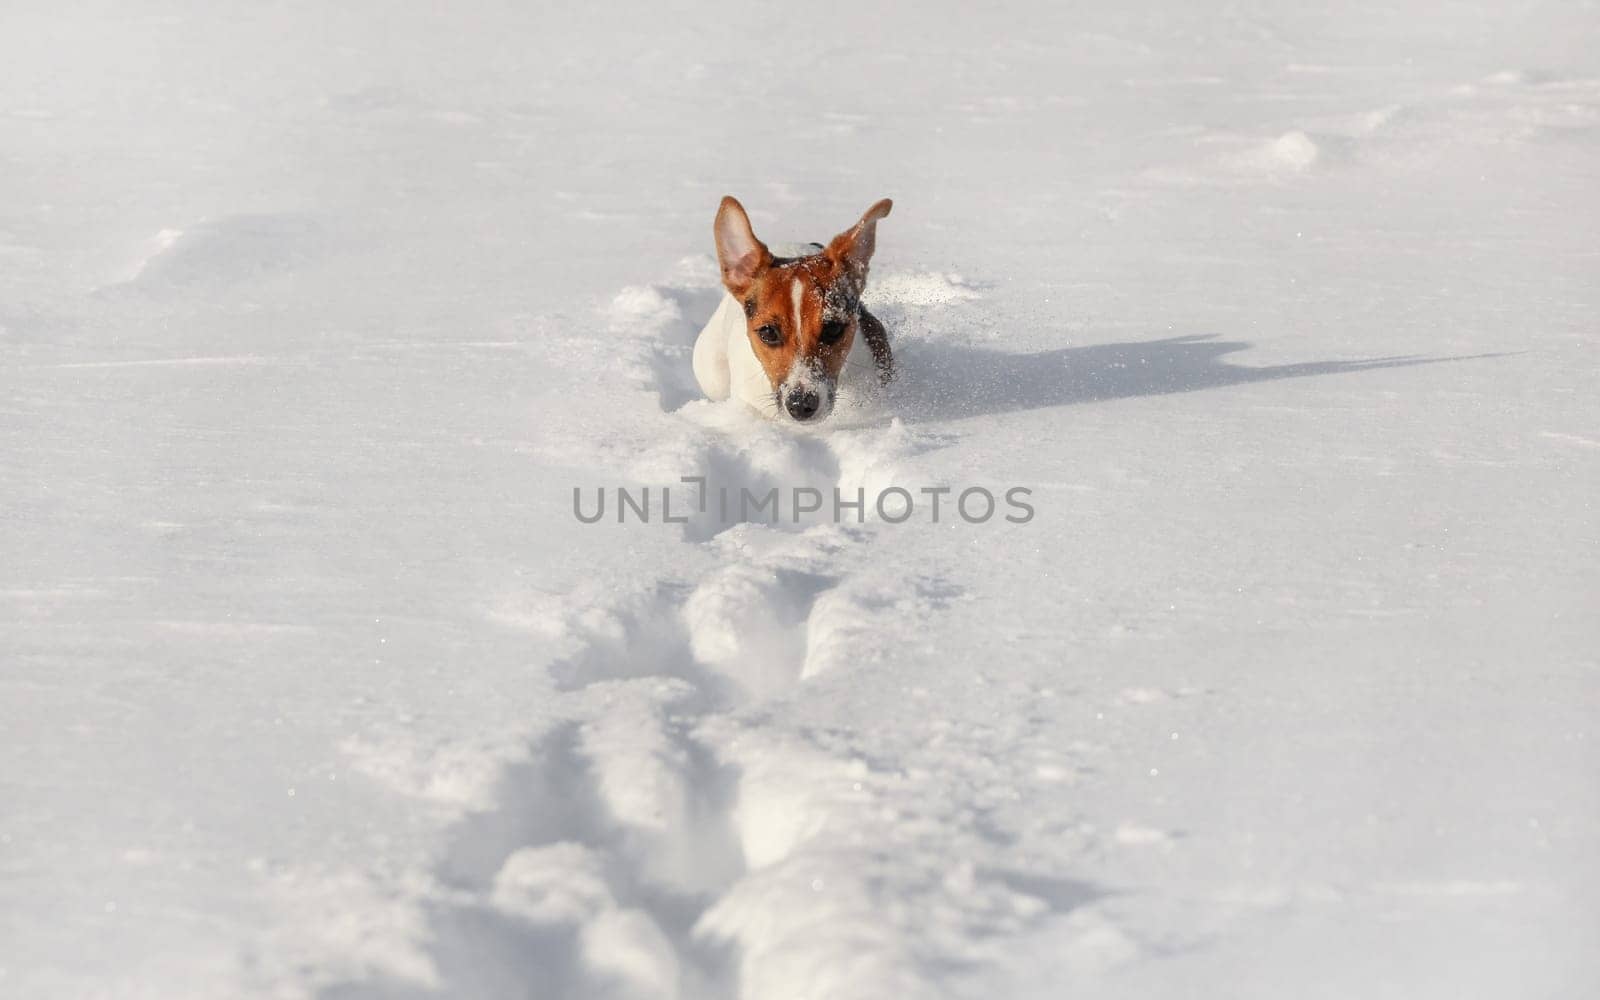 Small Jack Russell terrier running in deep snow, only her head visible.